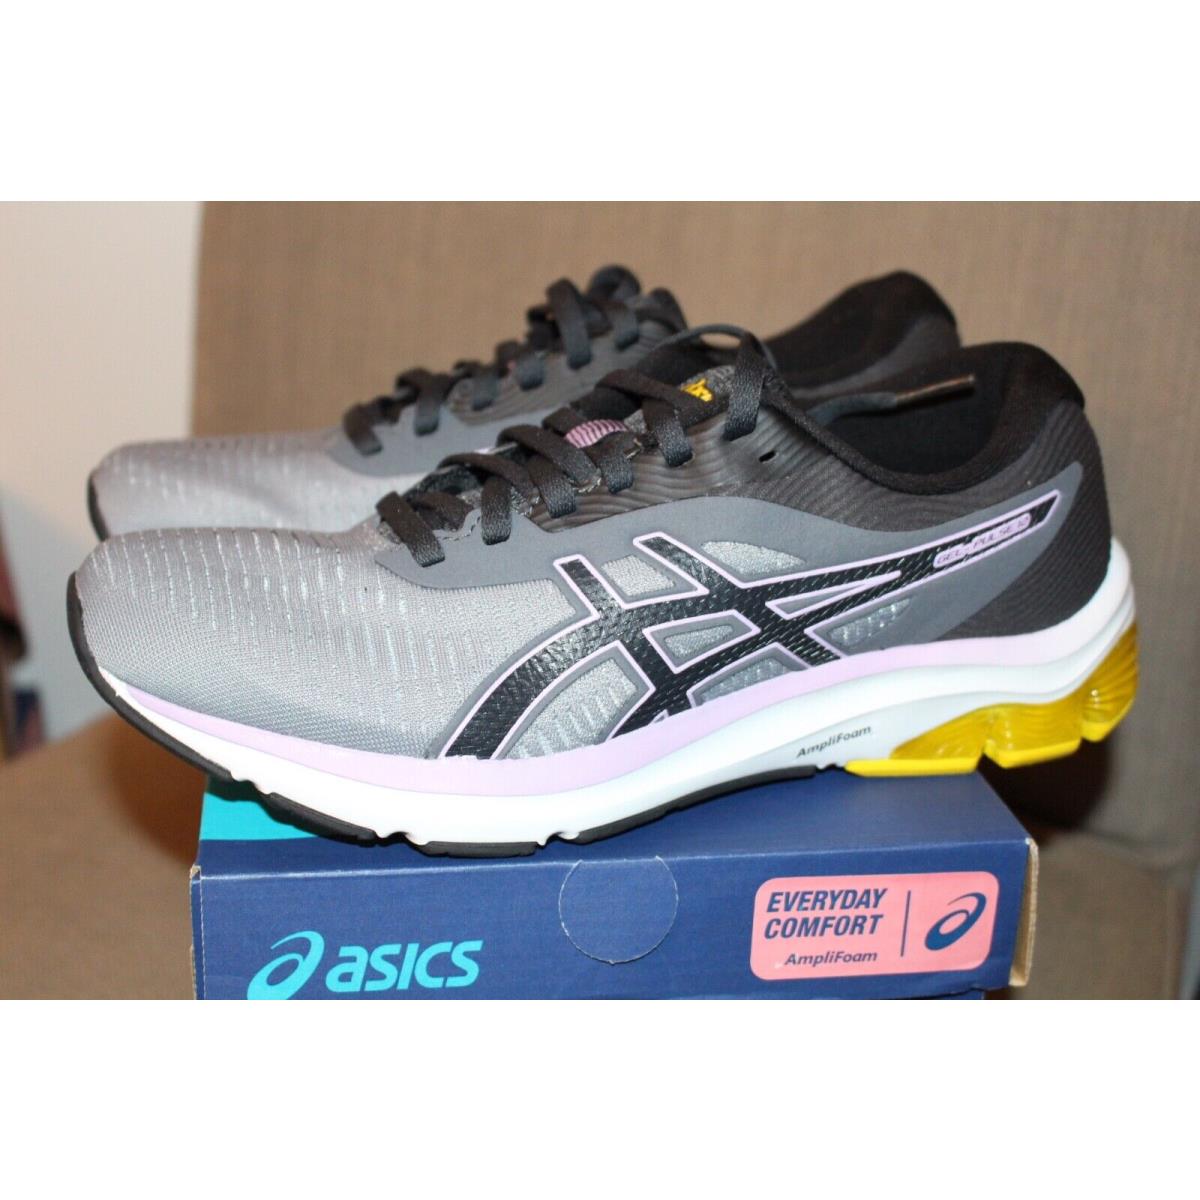 Asics Gel-pulse 12 Womens Running Shoes Size 8.5 Graphite Gray